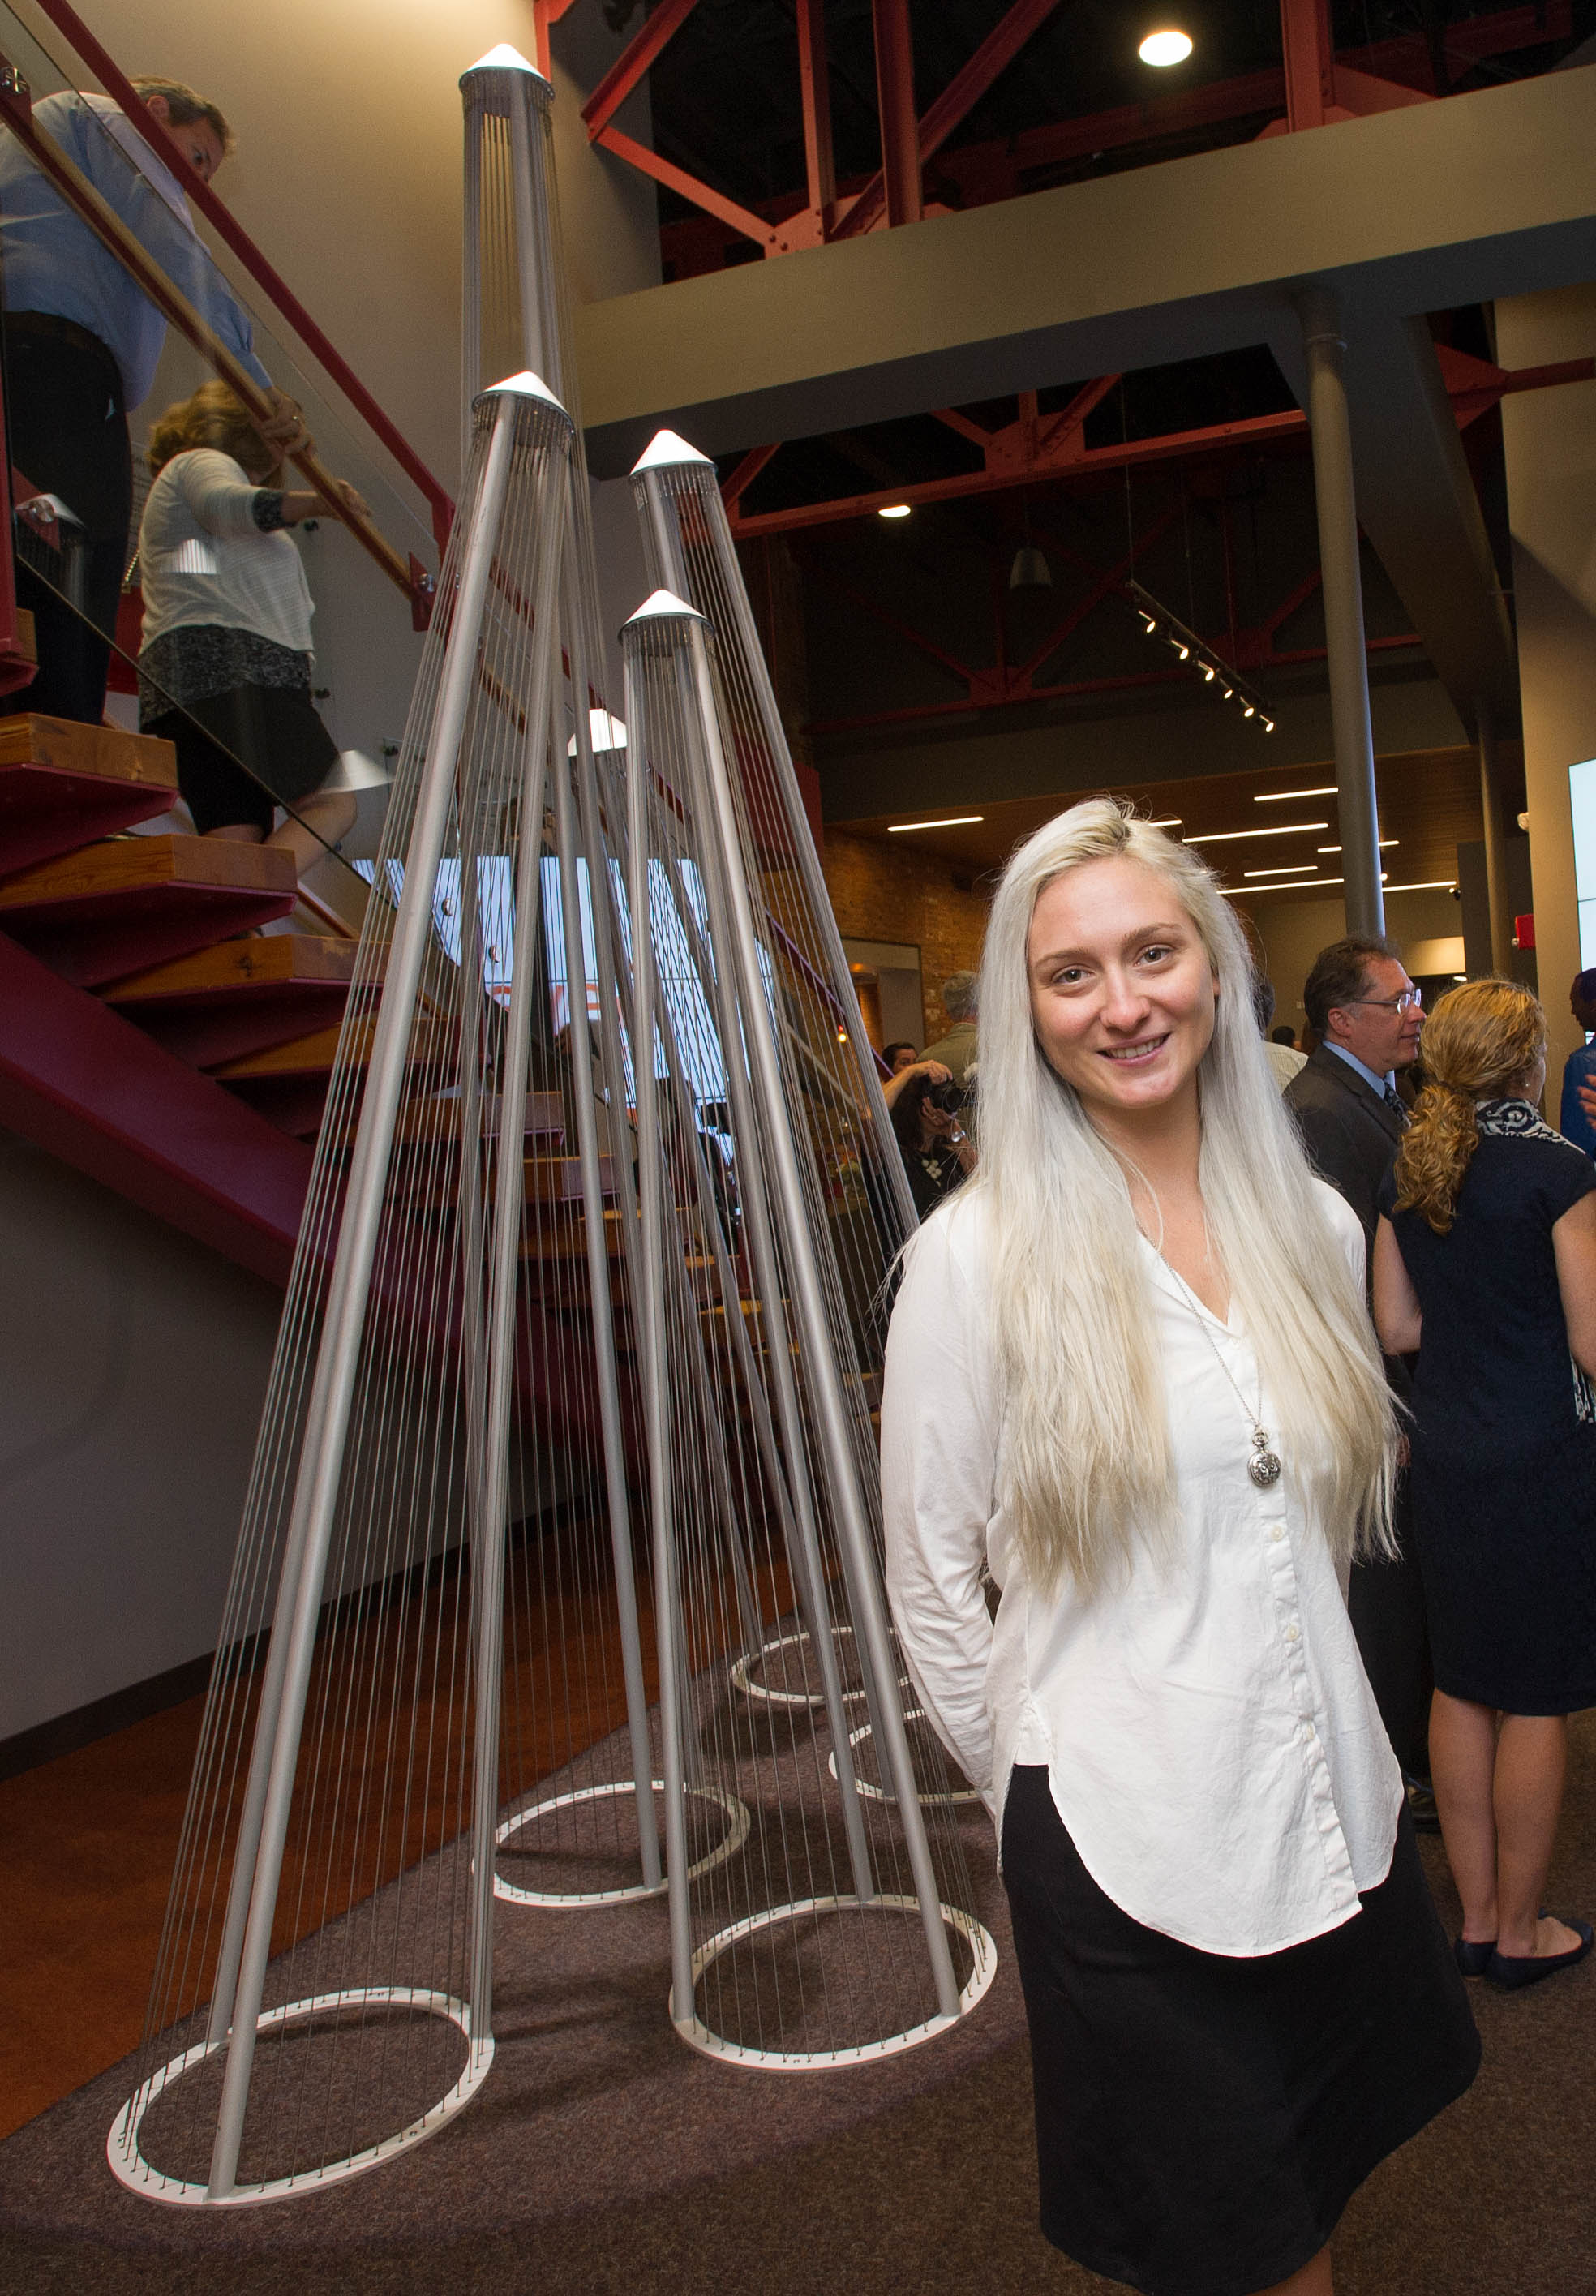 Julia Manson with her sculpture in the Geva Theatre lobby in 2016.